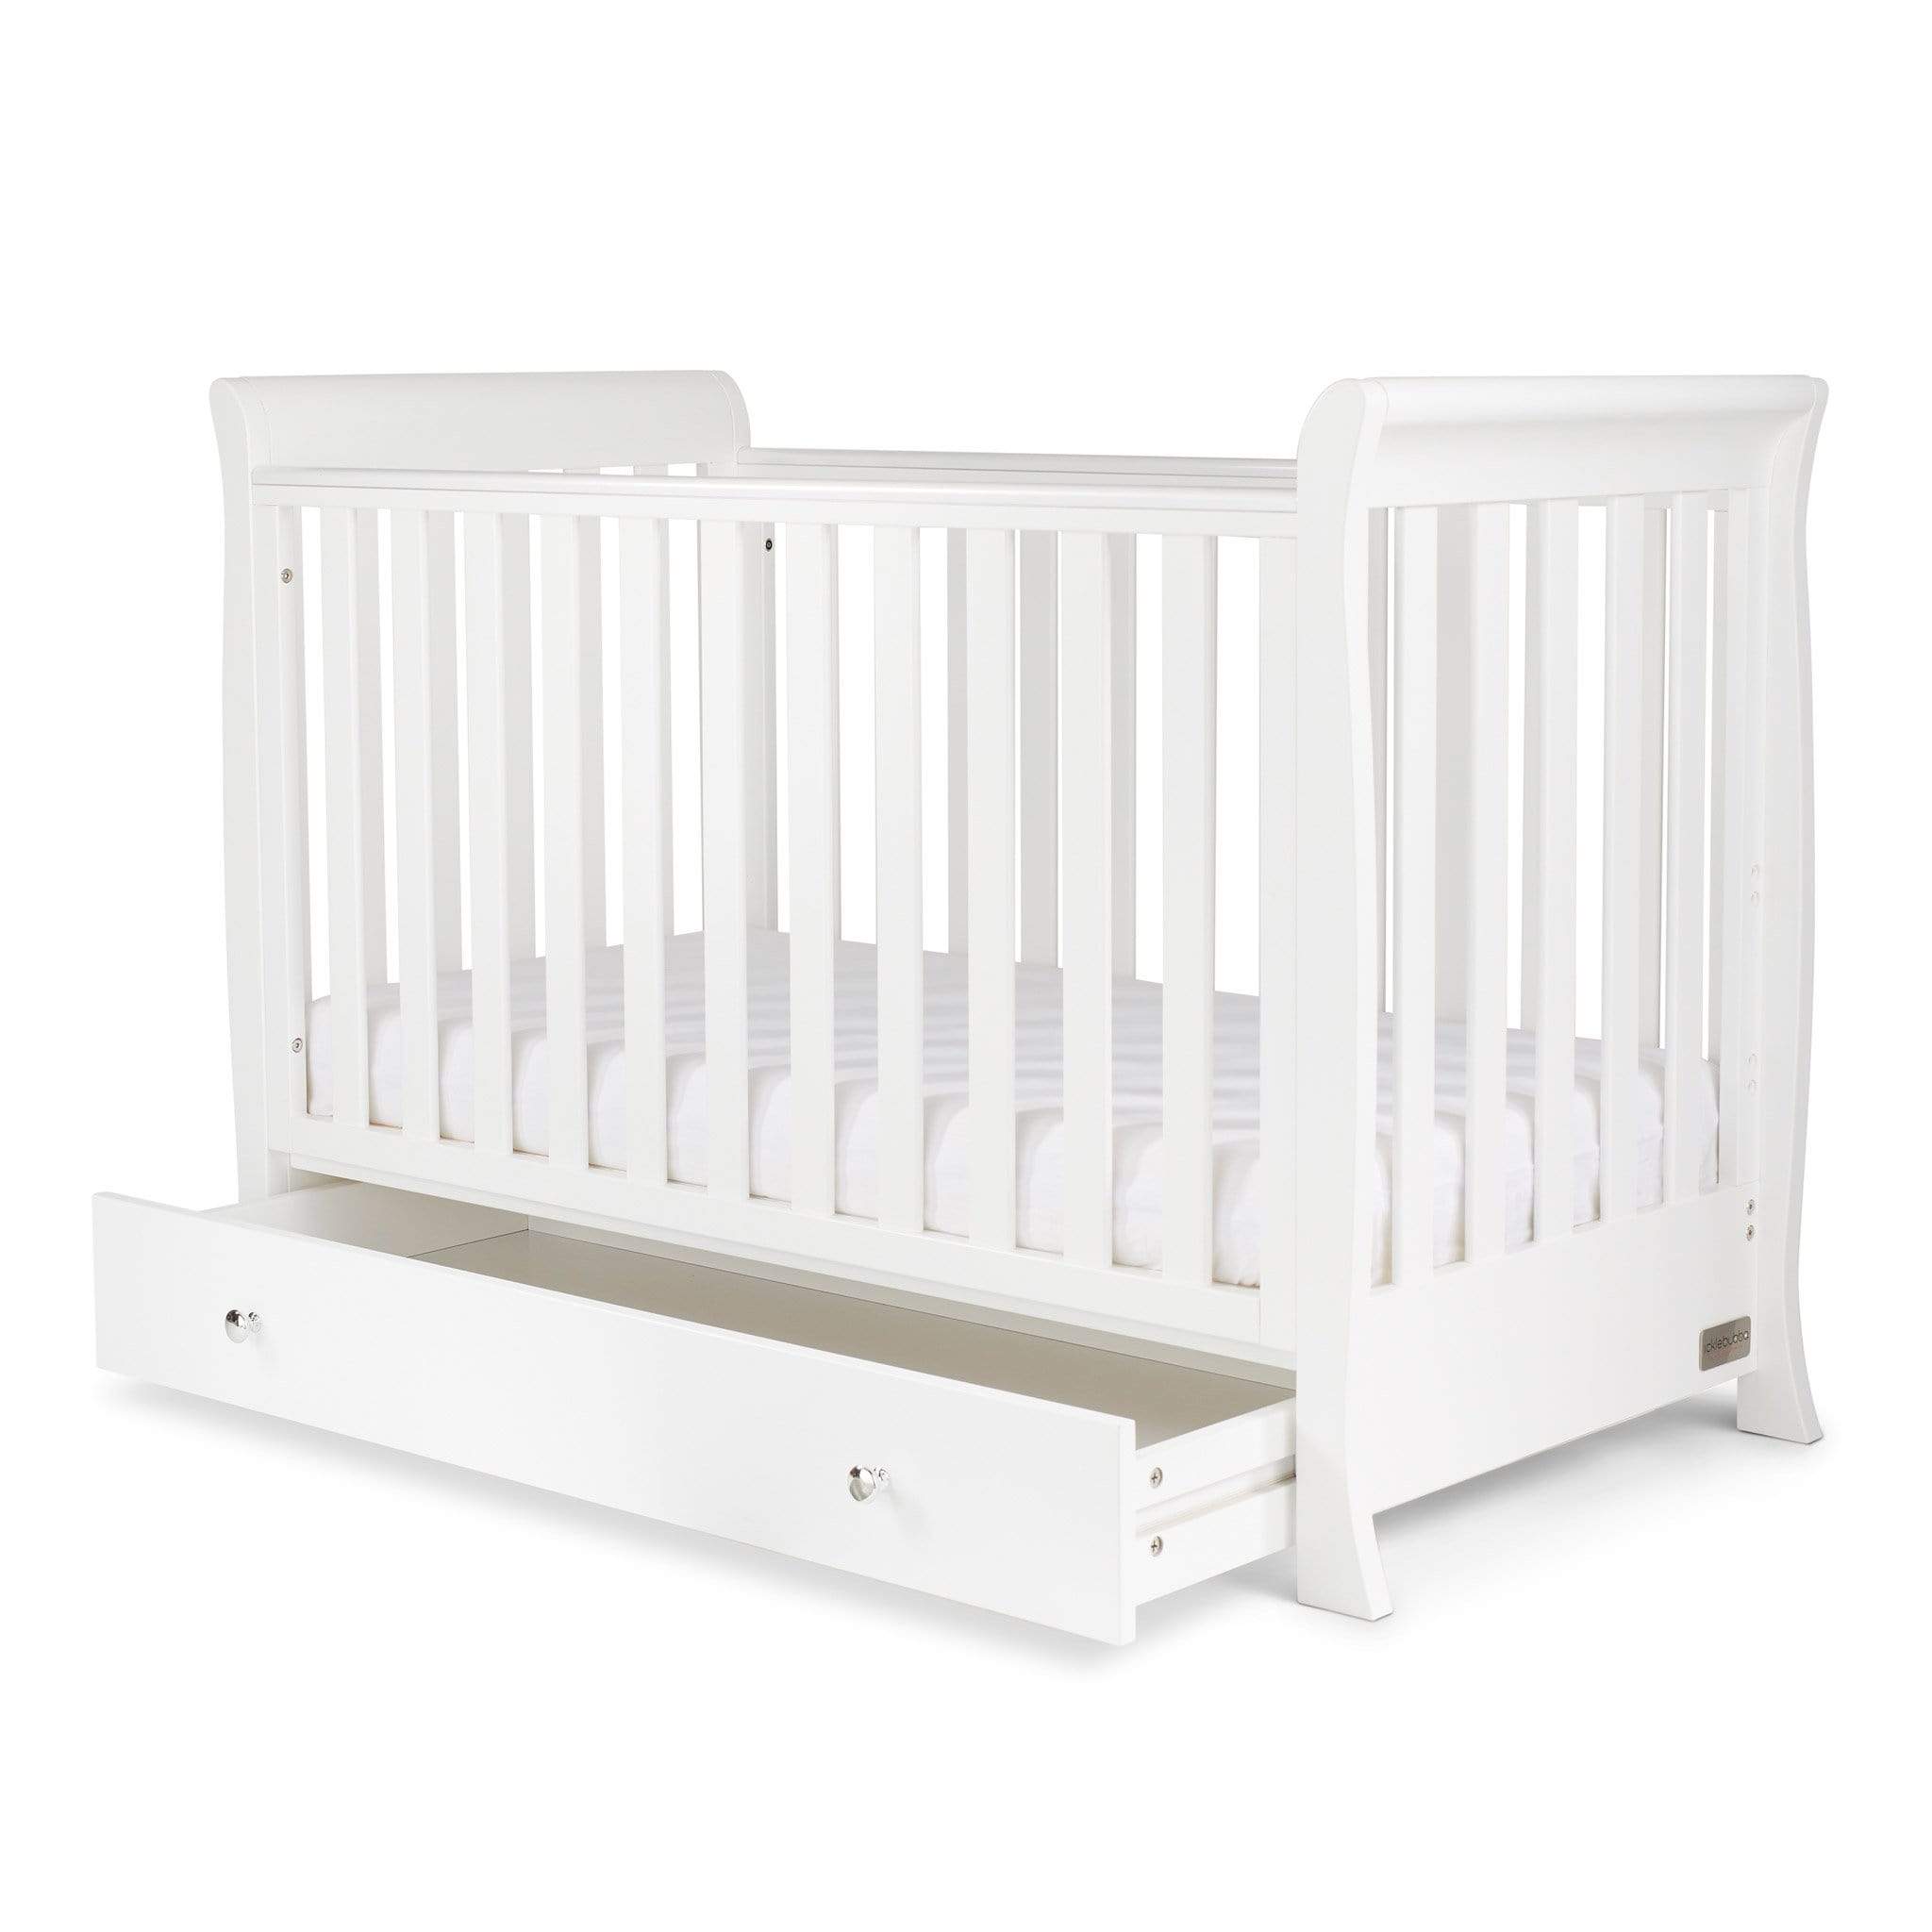 Ickle Bubba Cot Beds Ickle Bubba Snowdon 4 in 1 Mini Cot Bed - White